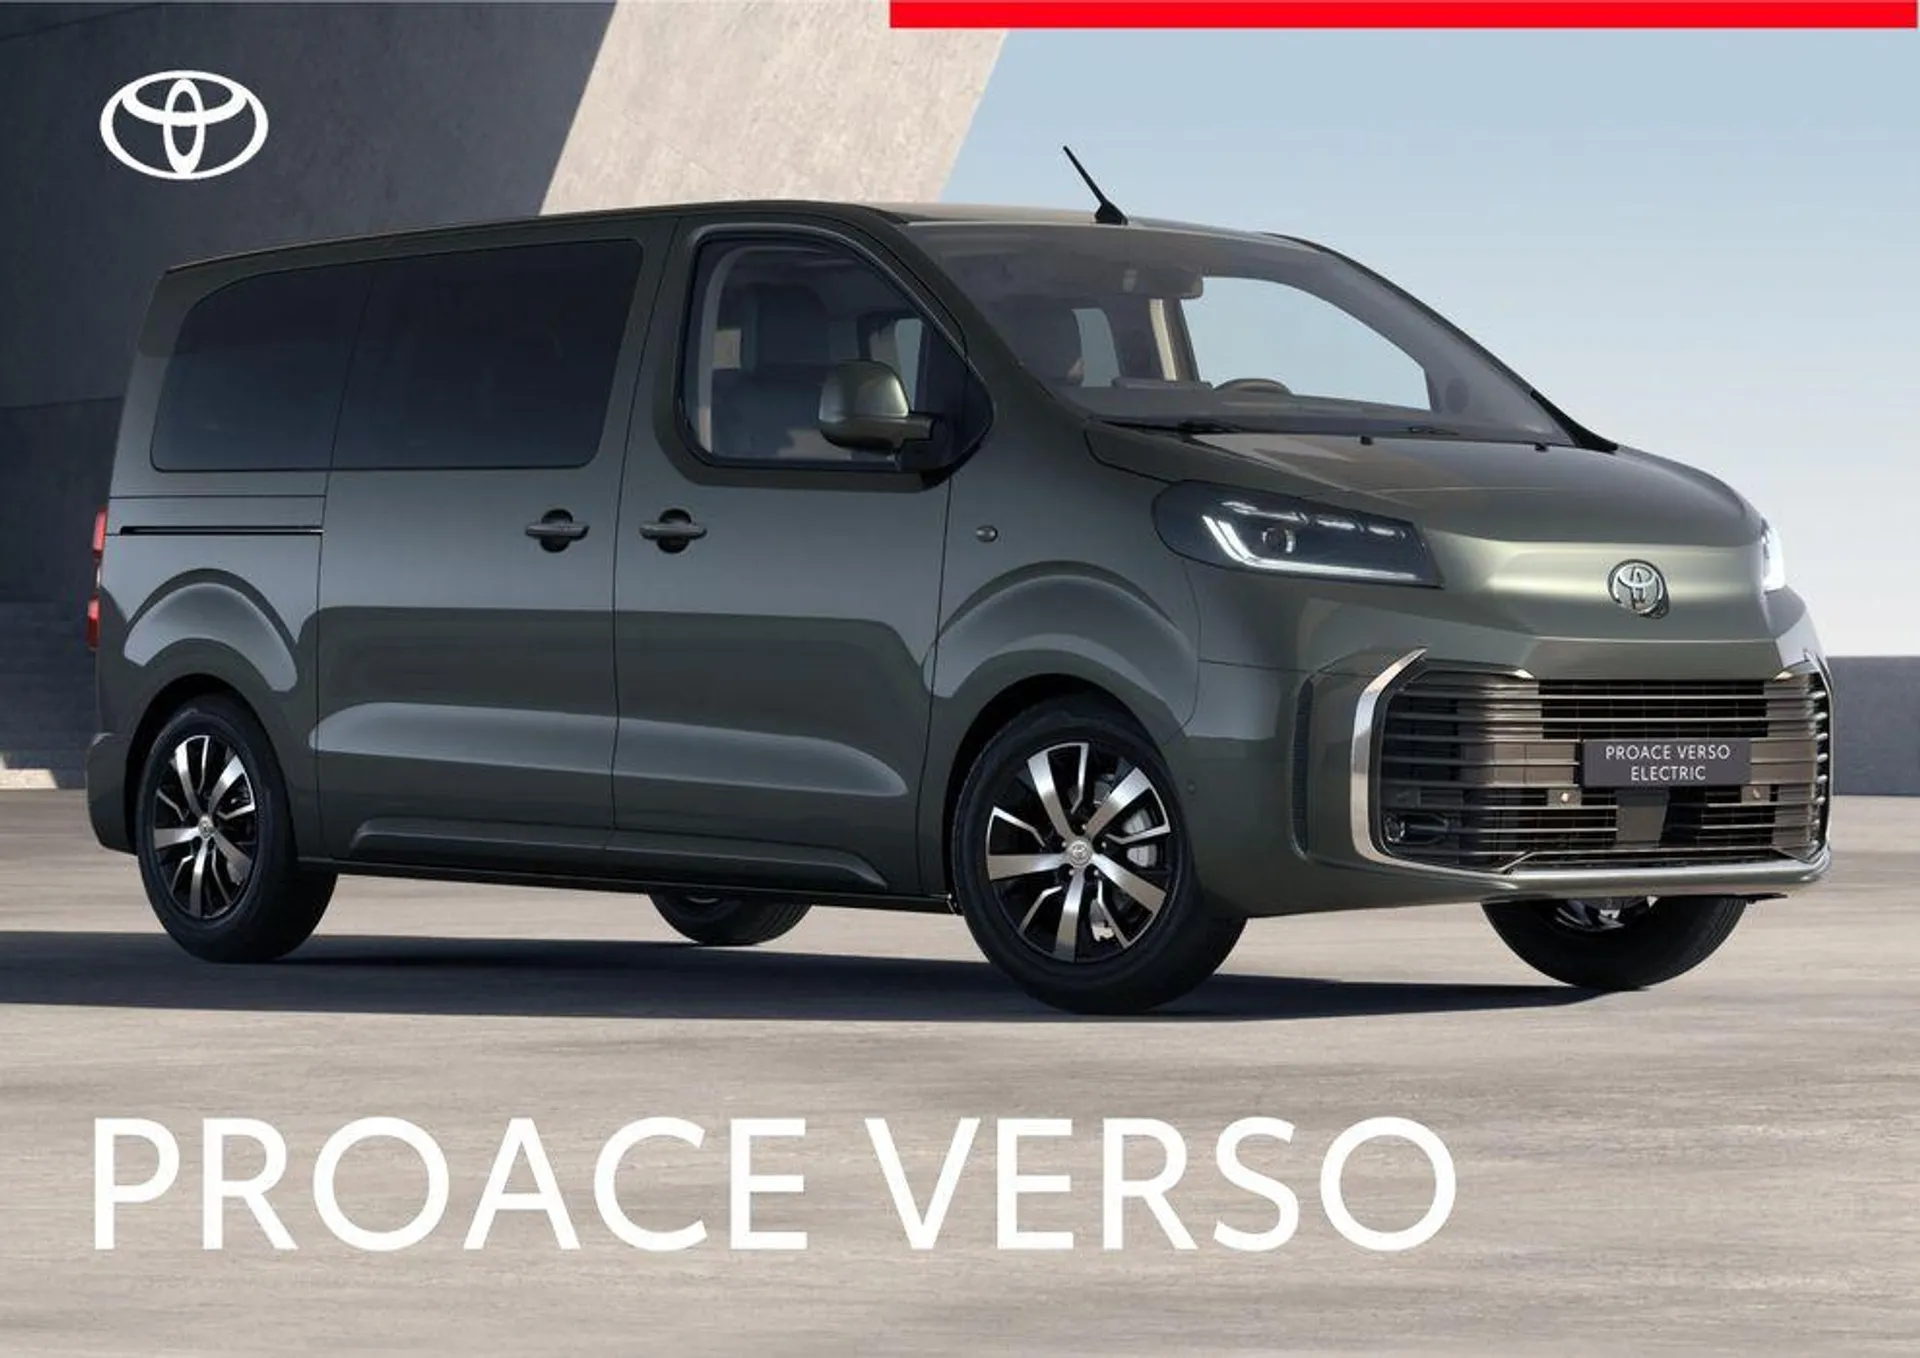 Toyota Proace Verso & Proace Verso Electric - 1